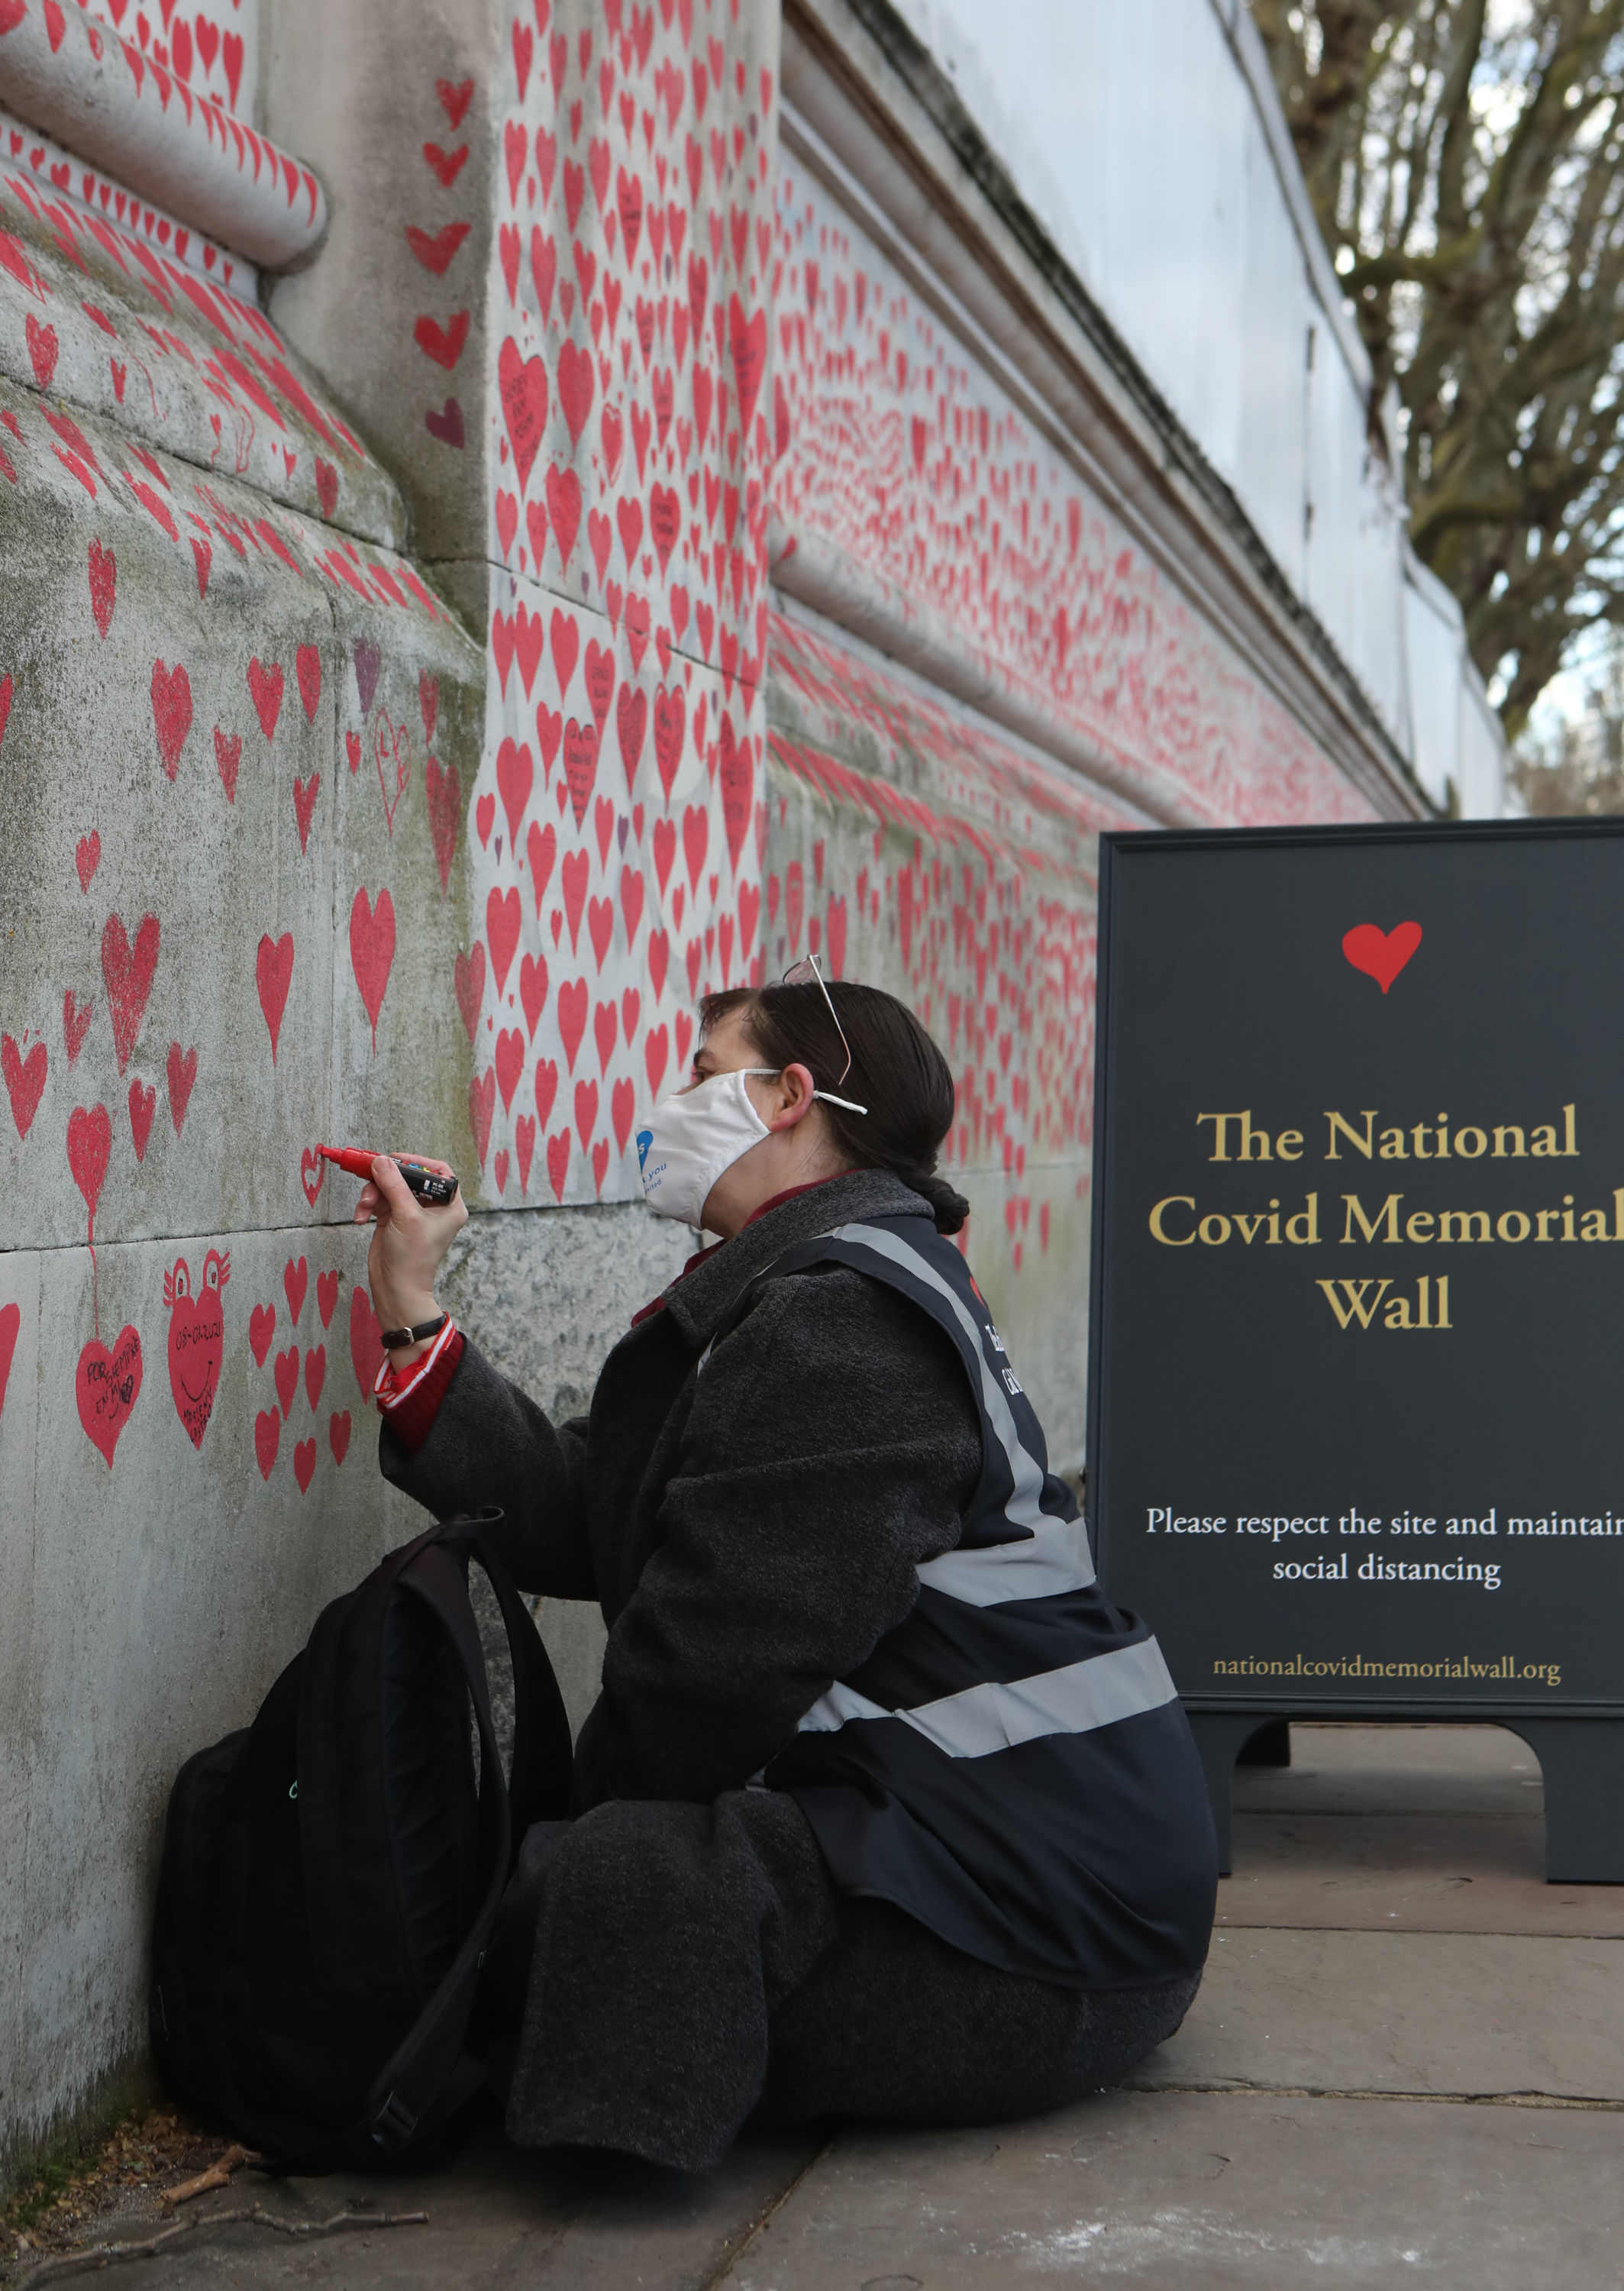 A volunteer adds hearts to the National Covid Memorial Wall in Westminster, central London